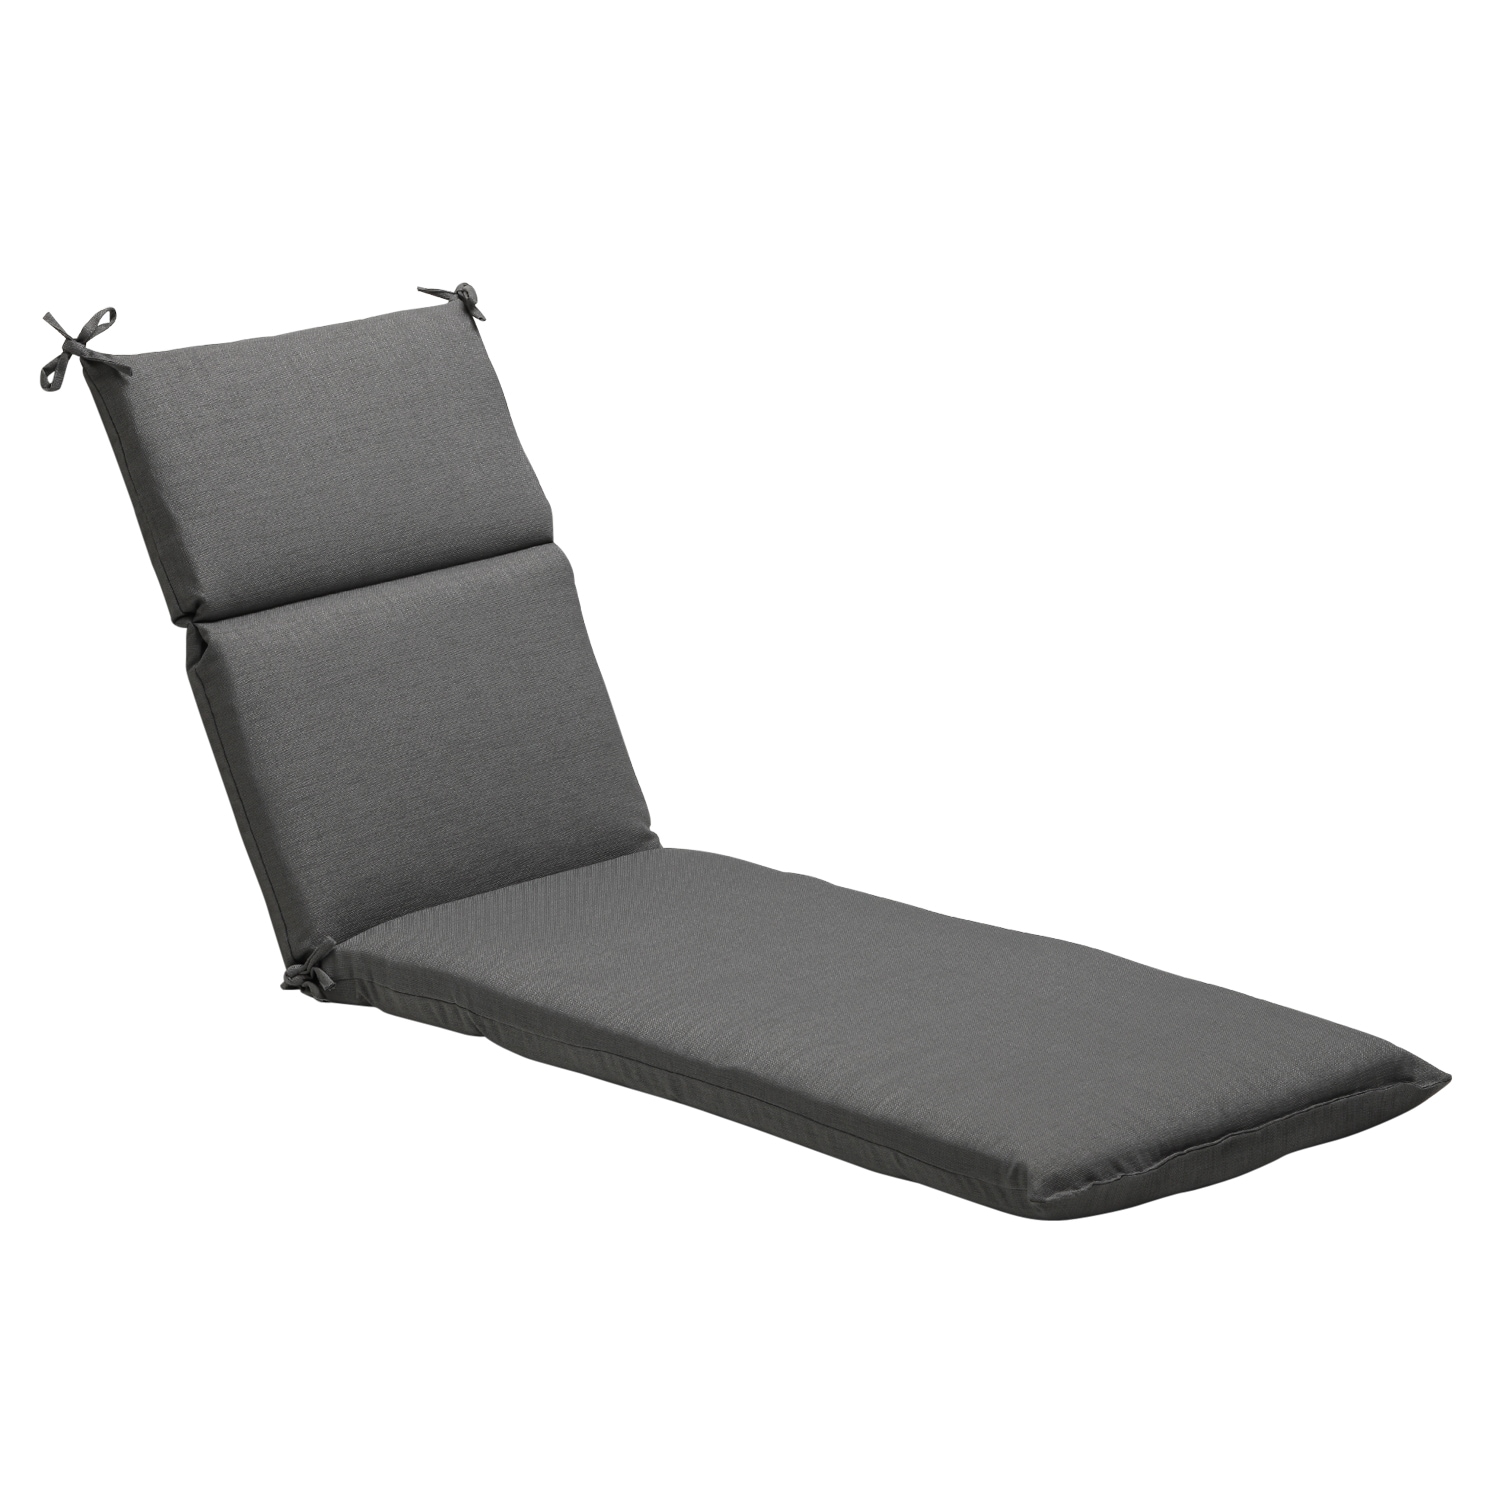 Solid Grey Textured Outdoor Chaise Lounge Cushion  Free Shipping Today